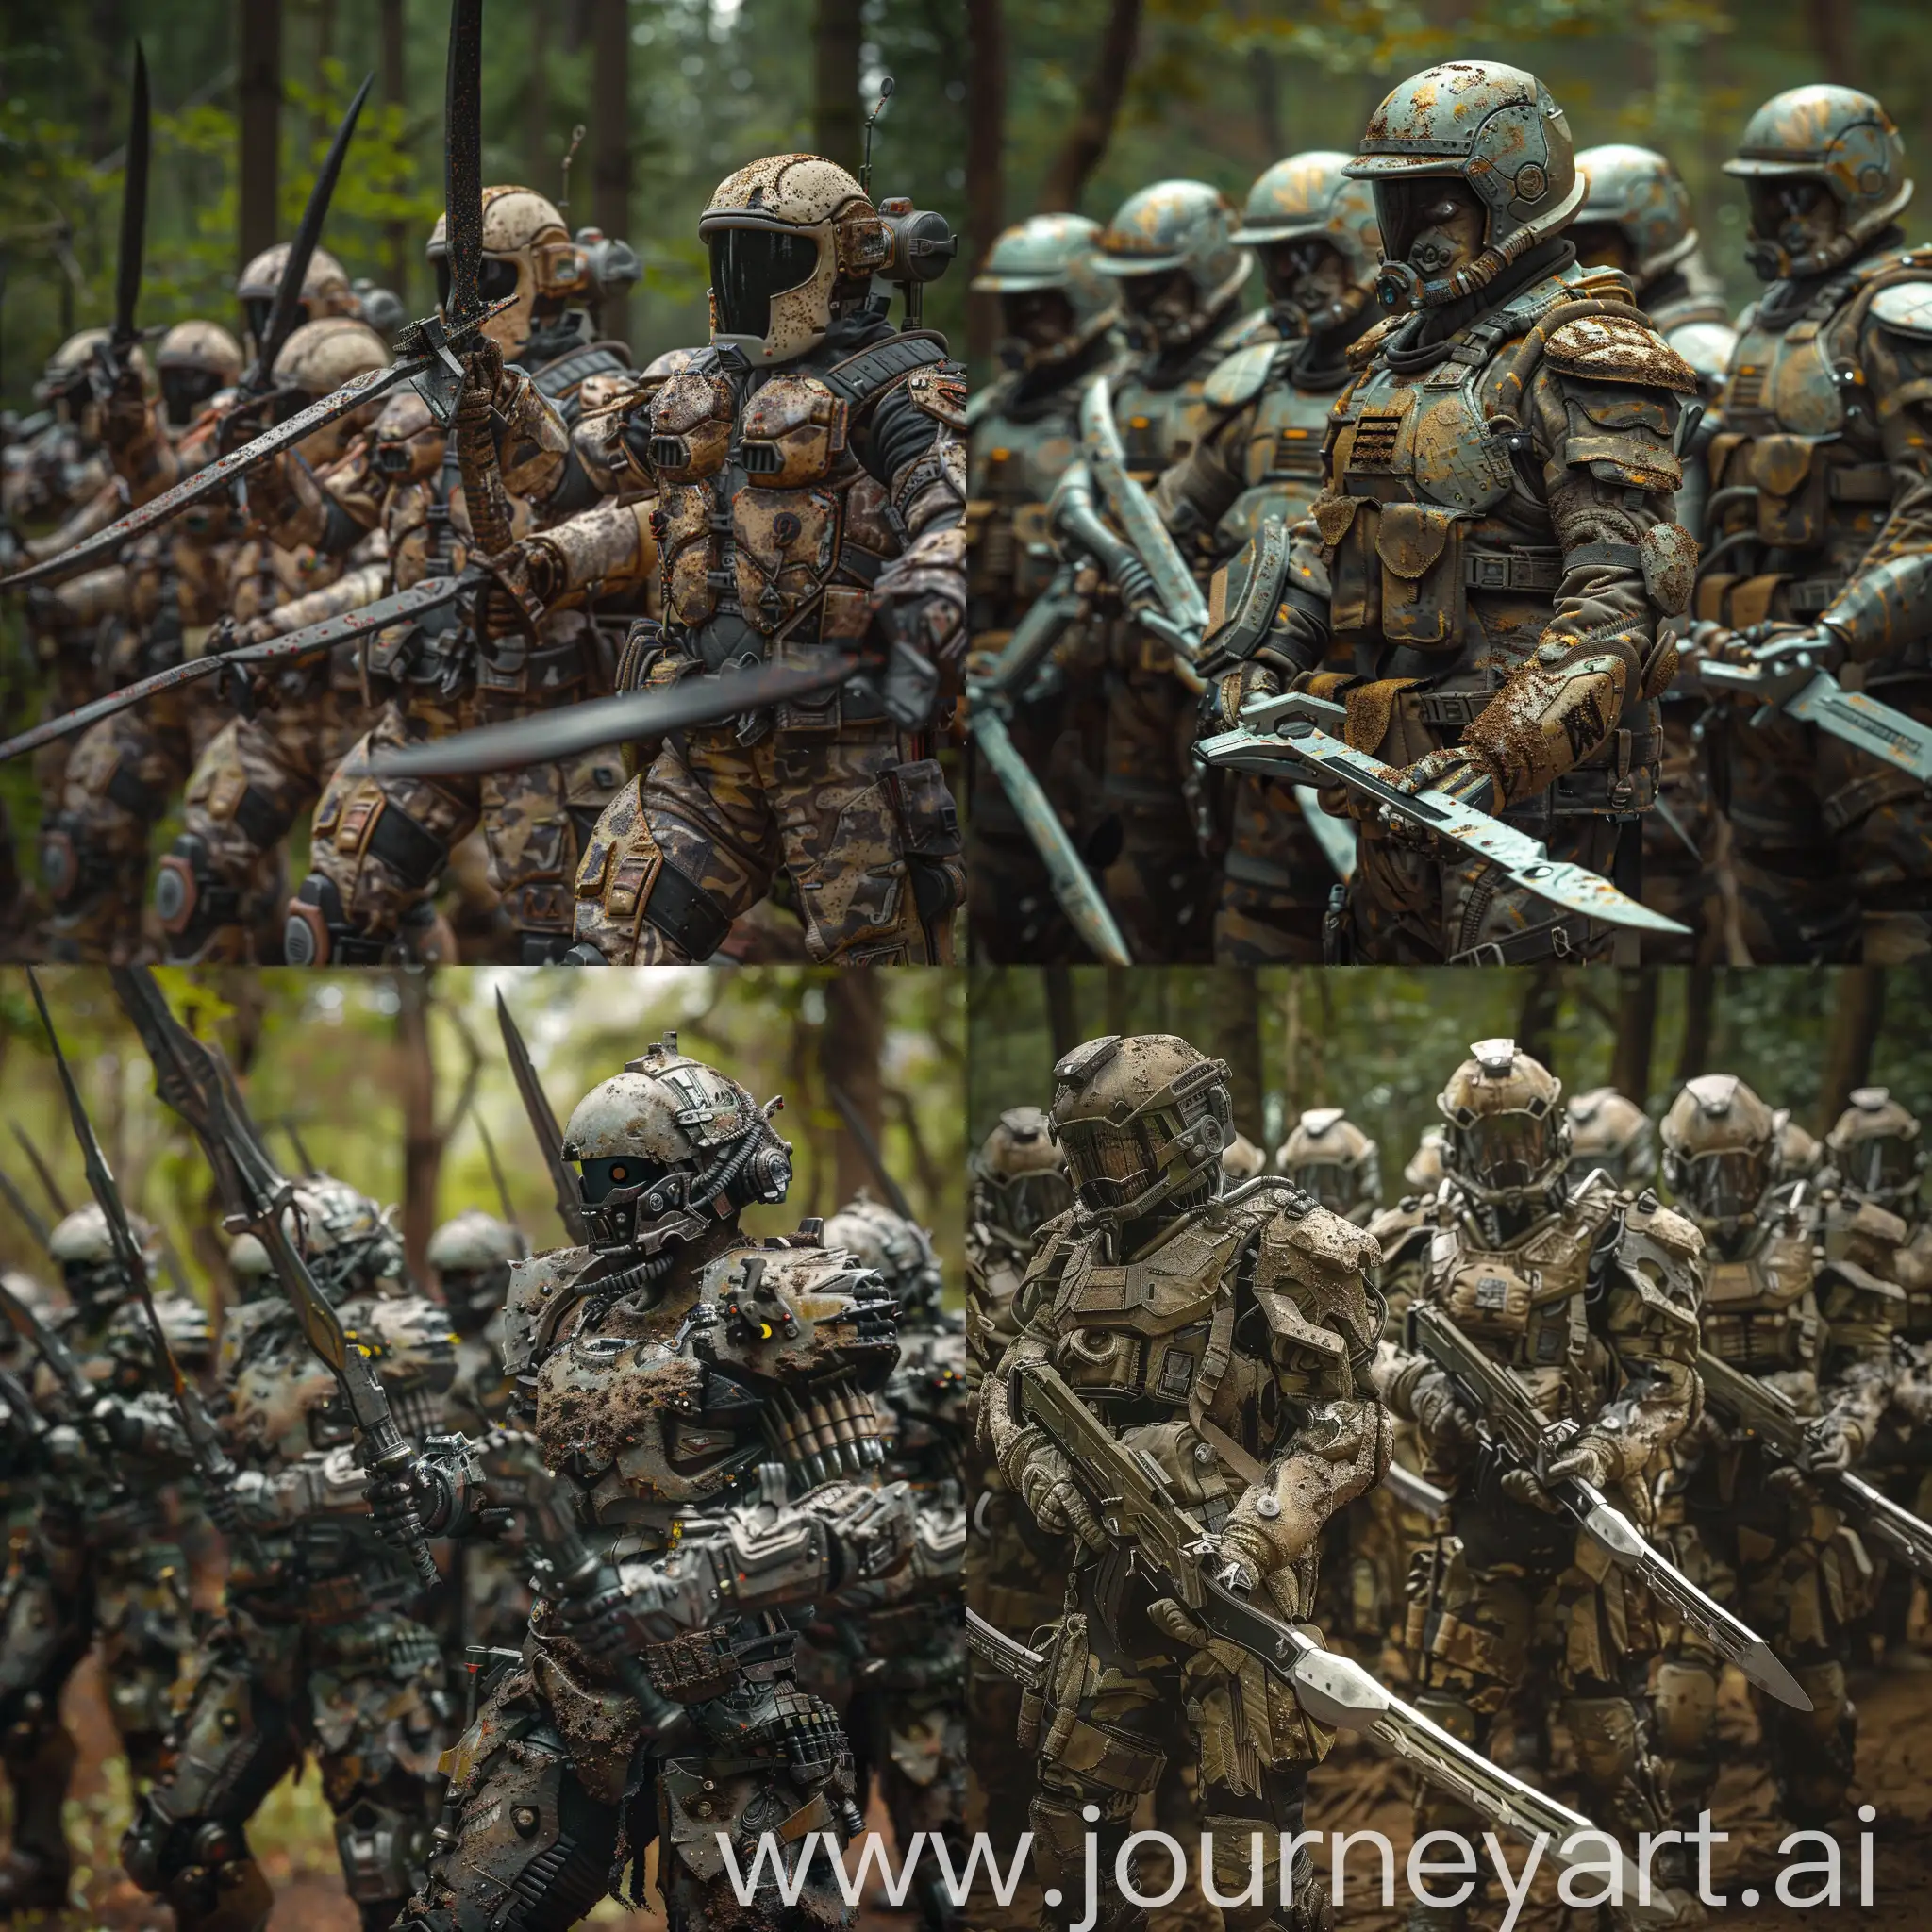 A squad of Dune Sardaukar sci-fi soldiers armed with futuristic katana-like swords. They have a lot of technological gear and some of them are equipped with exosceleton. Their camouflage tactical suits are lightly covered with mud. They are stationed in the forest, and are eager for battle. 